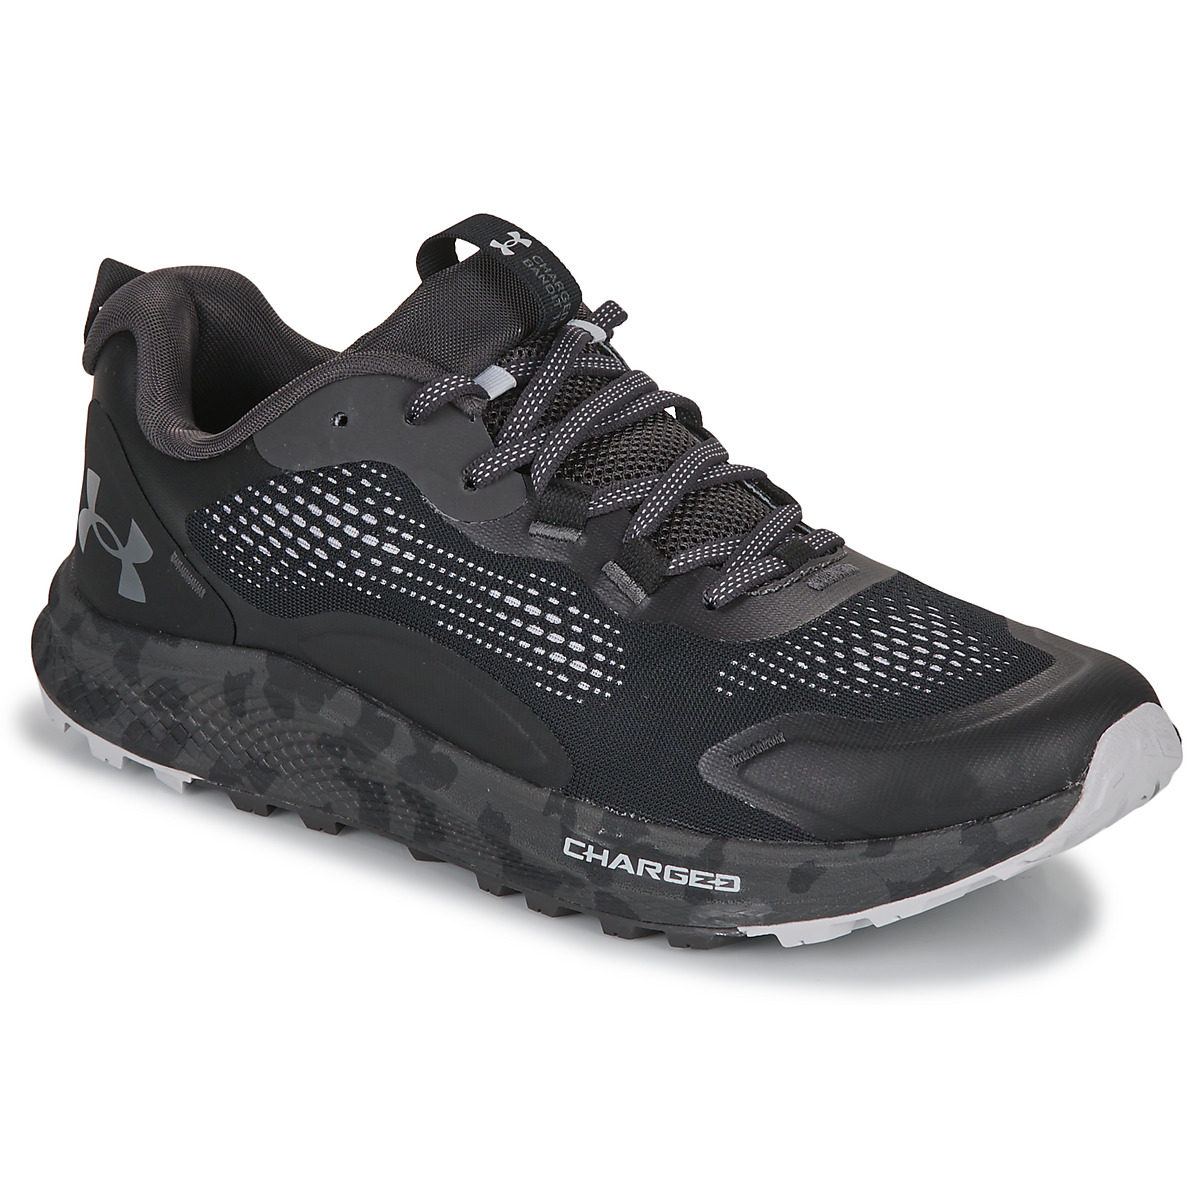 Under Armour Charged Bandit TR 2 Men